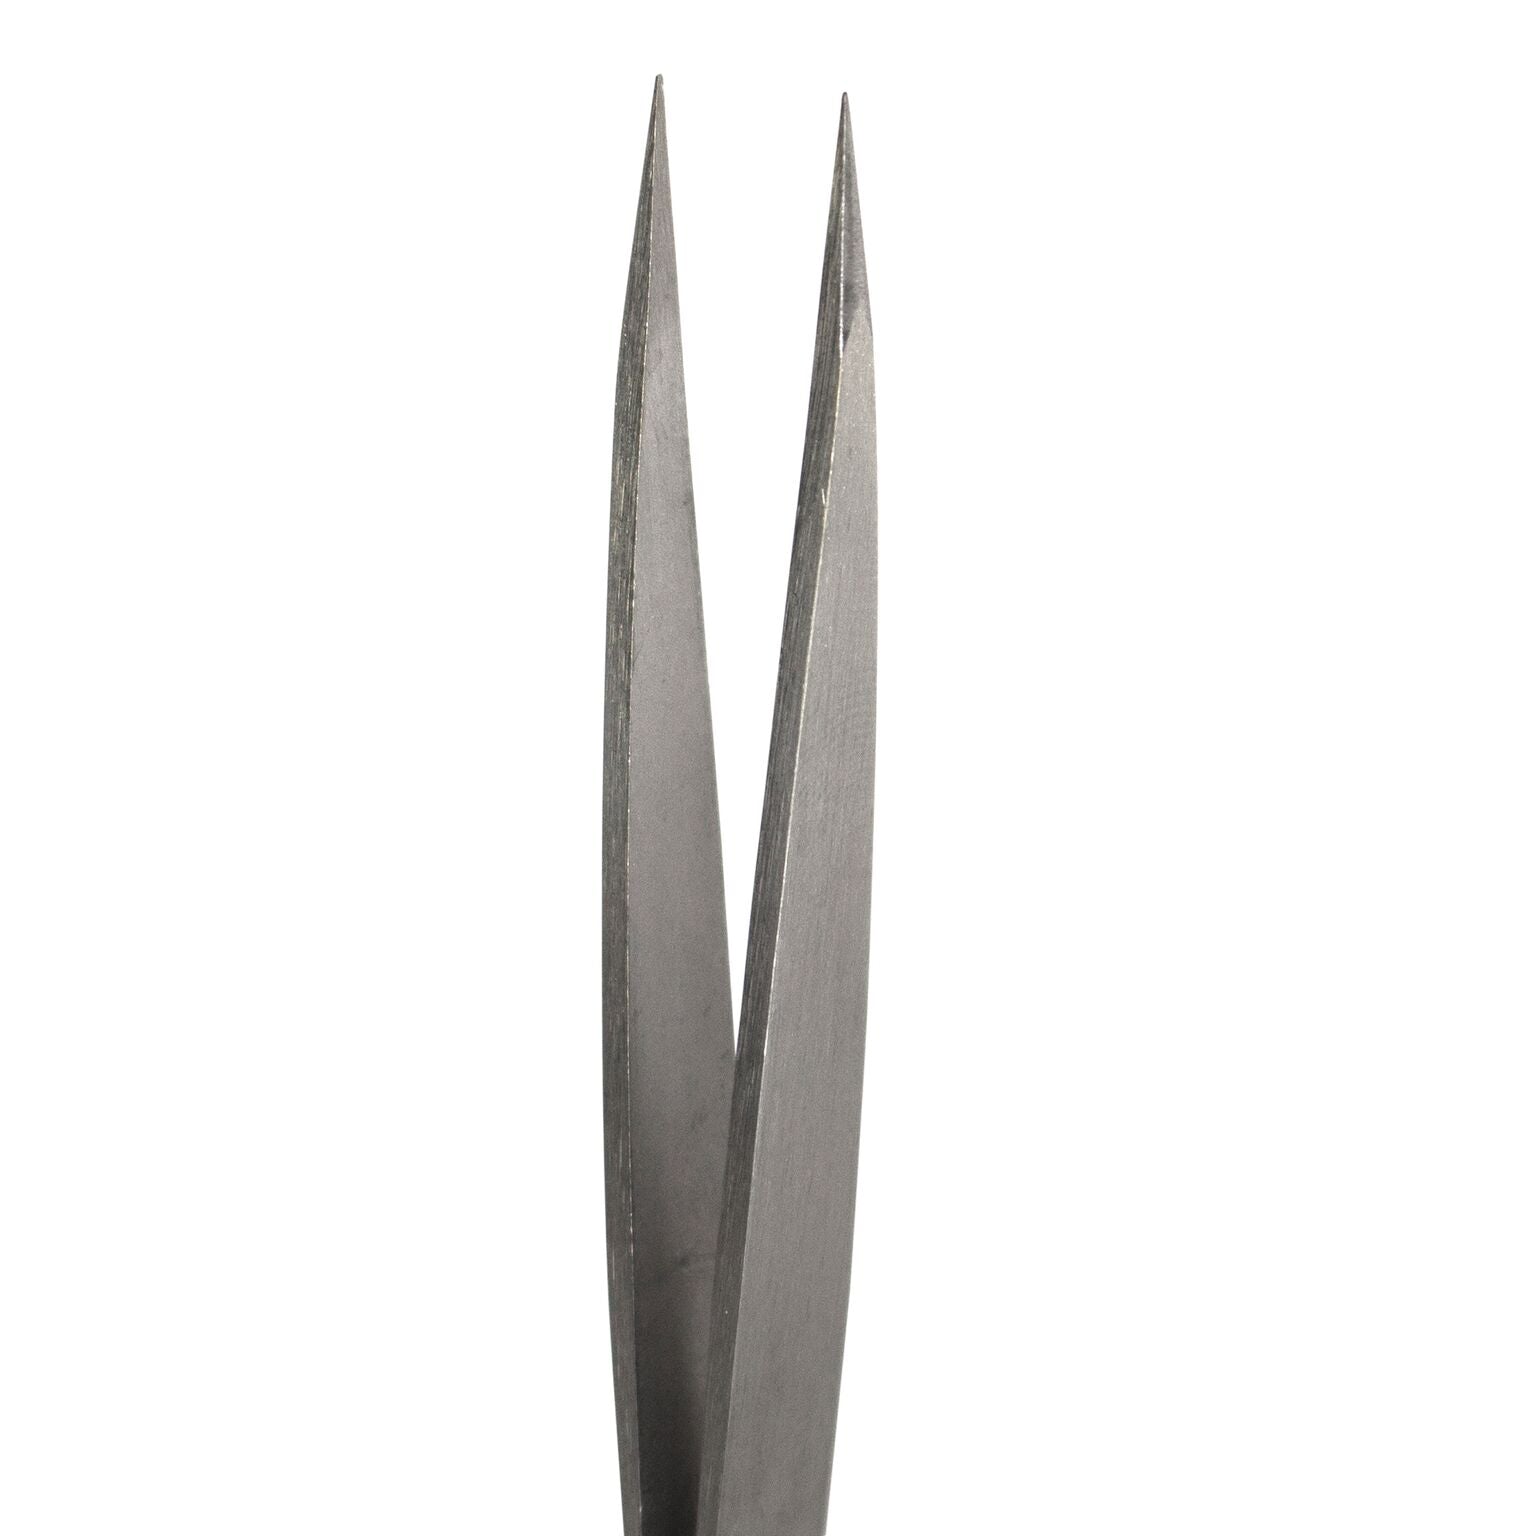 Lash and Brow Professional Pointed Tweezers